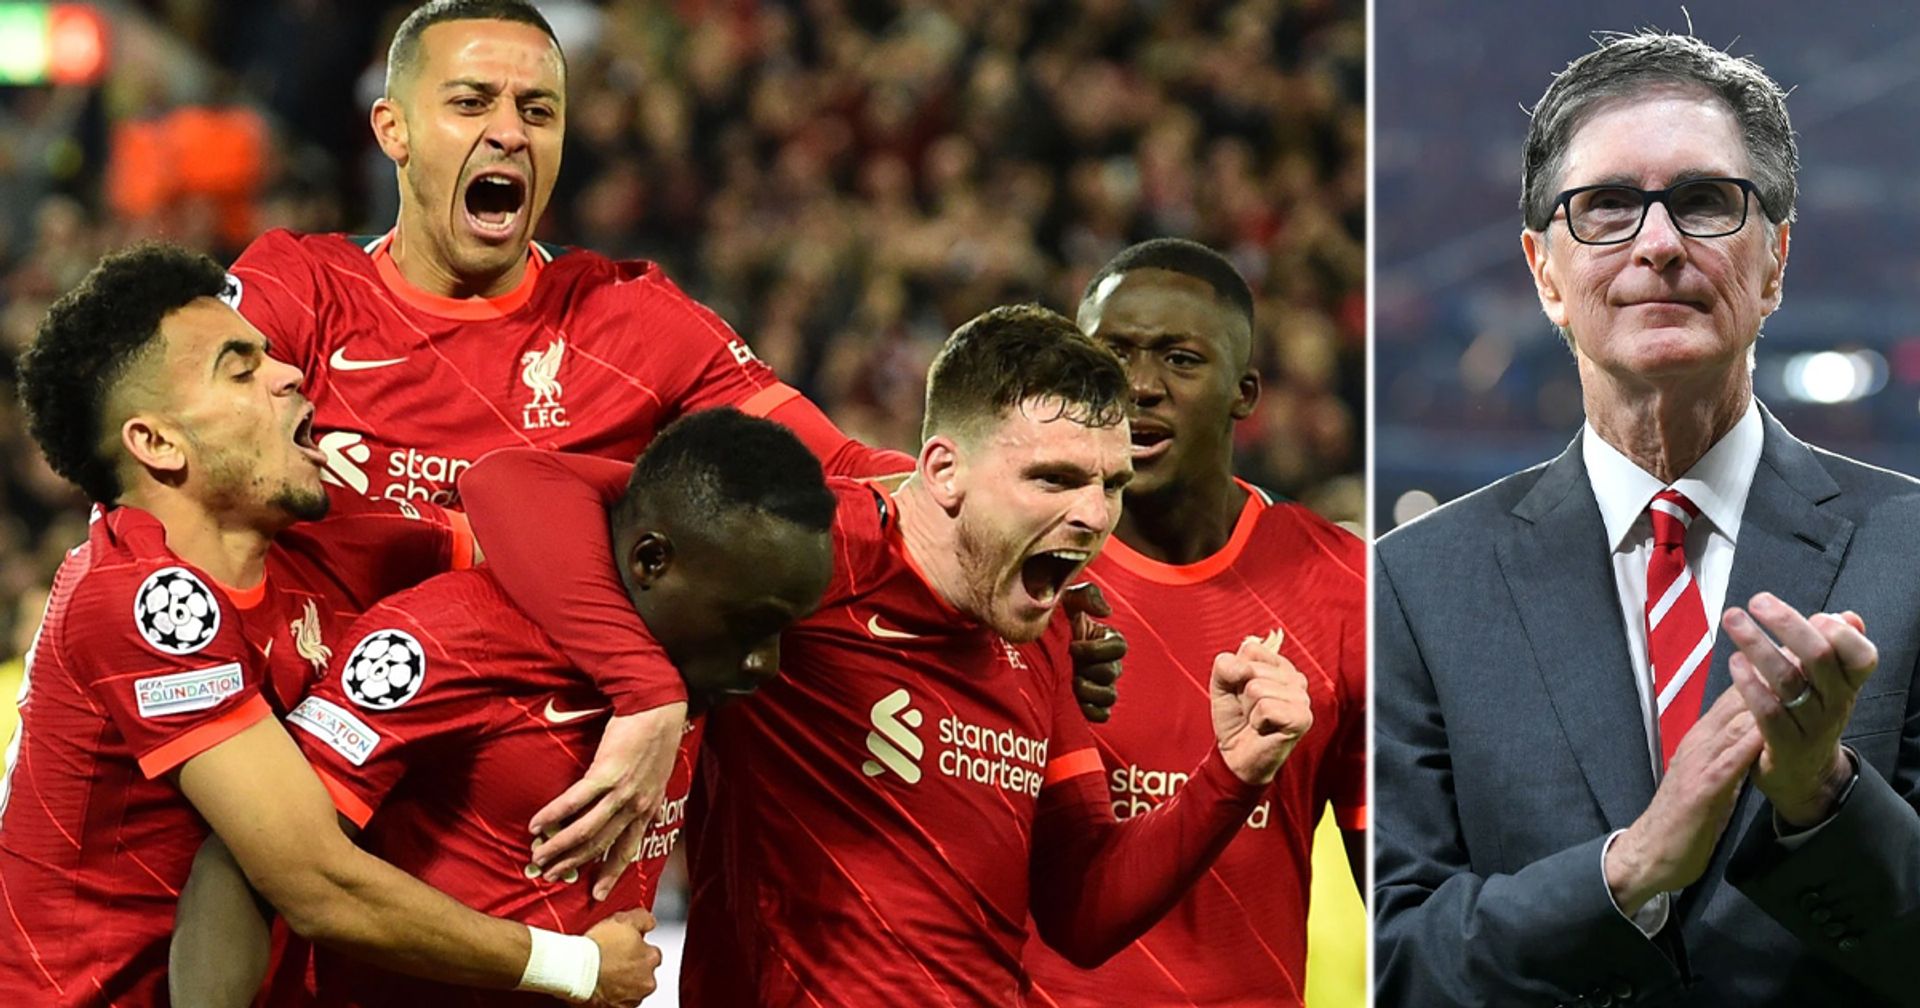 Liverpool set for 'record-breaking' income after reaching Champions League final